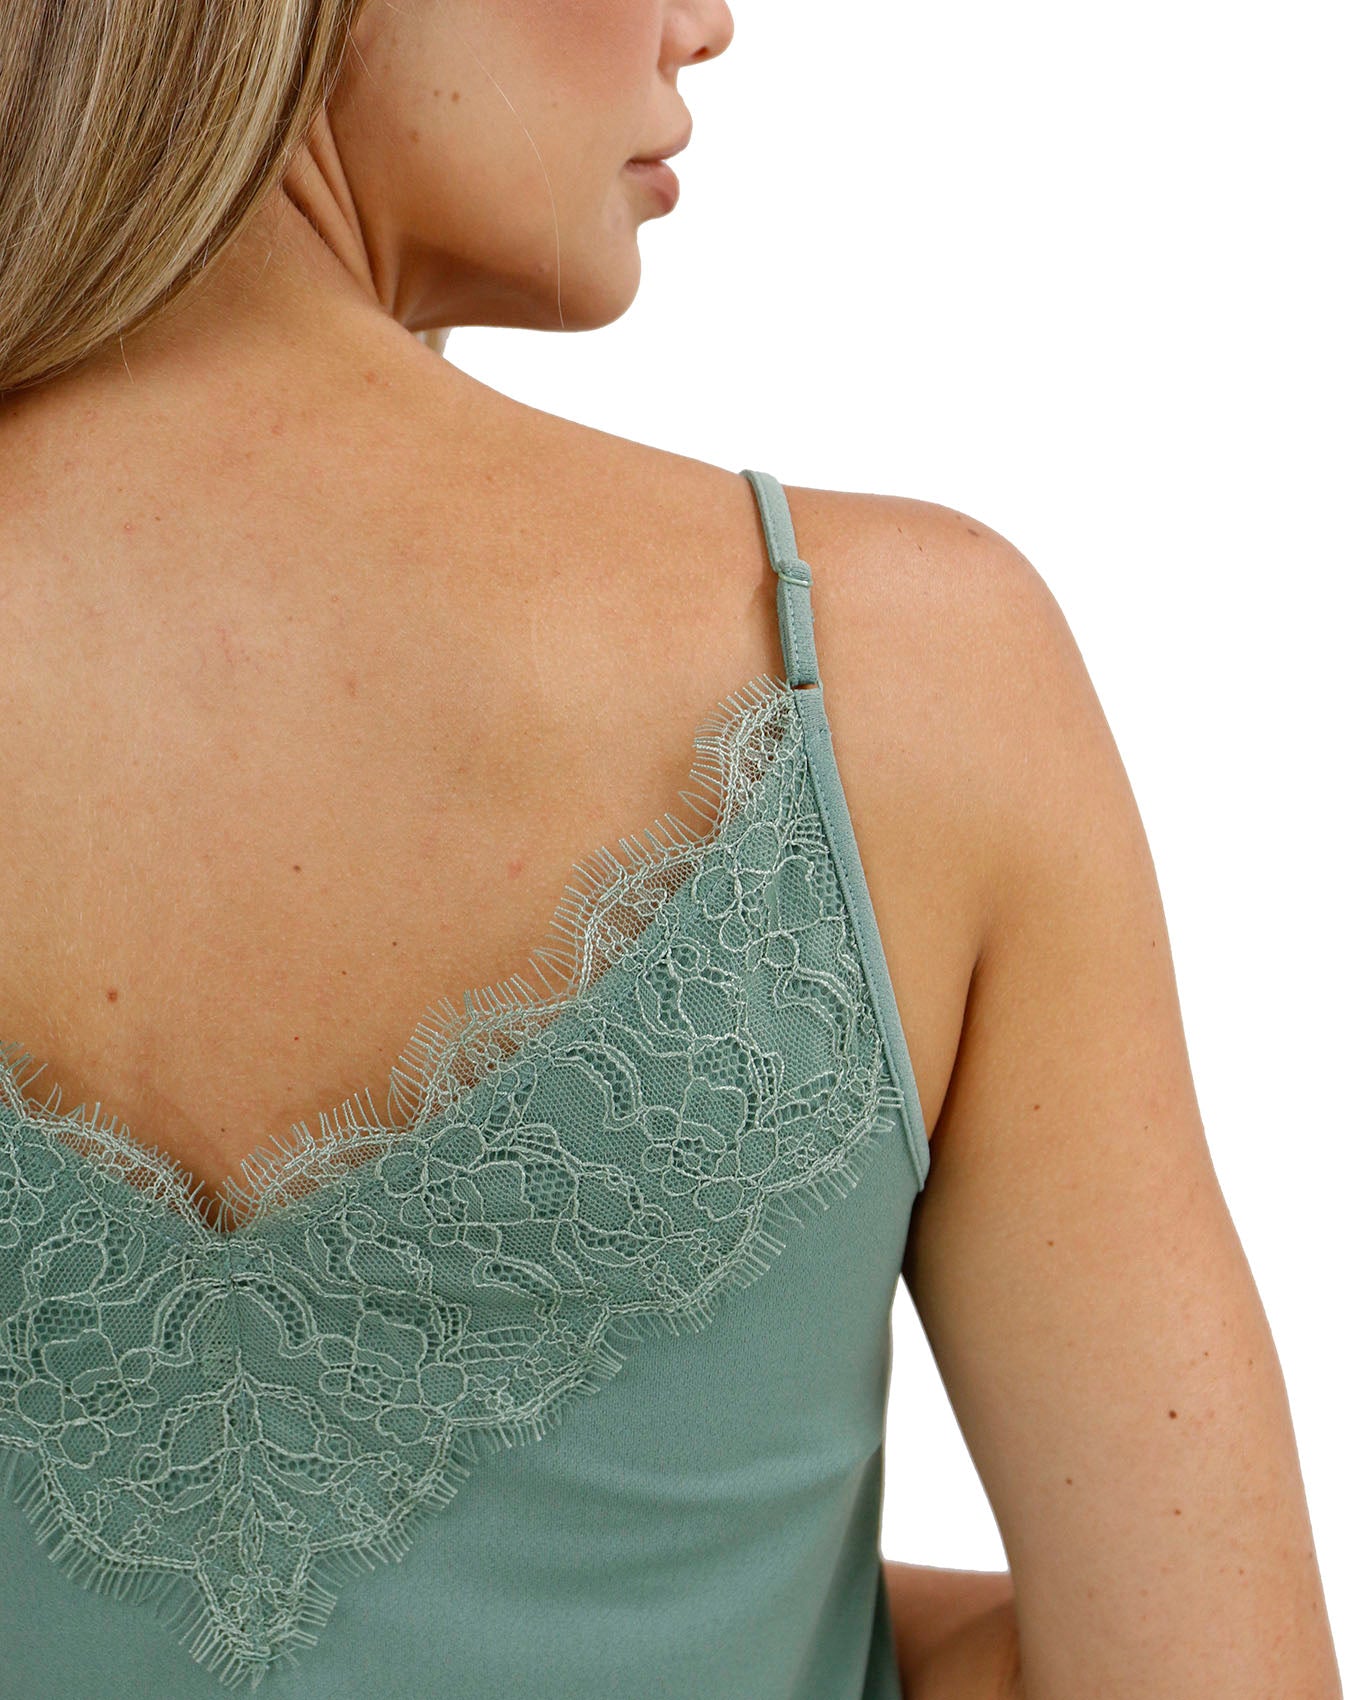 Stretch Lace Low Back Camisole  Lace camisole top, Stretch lace, Lace  camisole